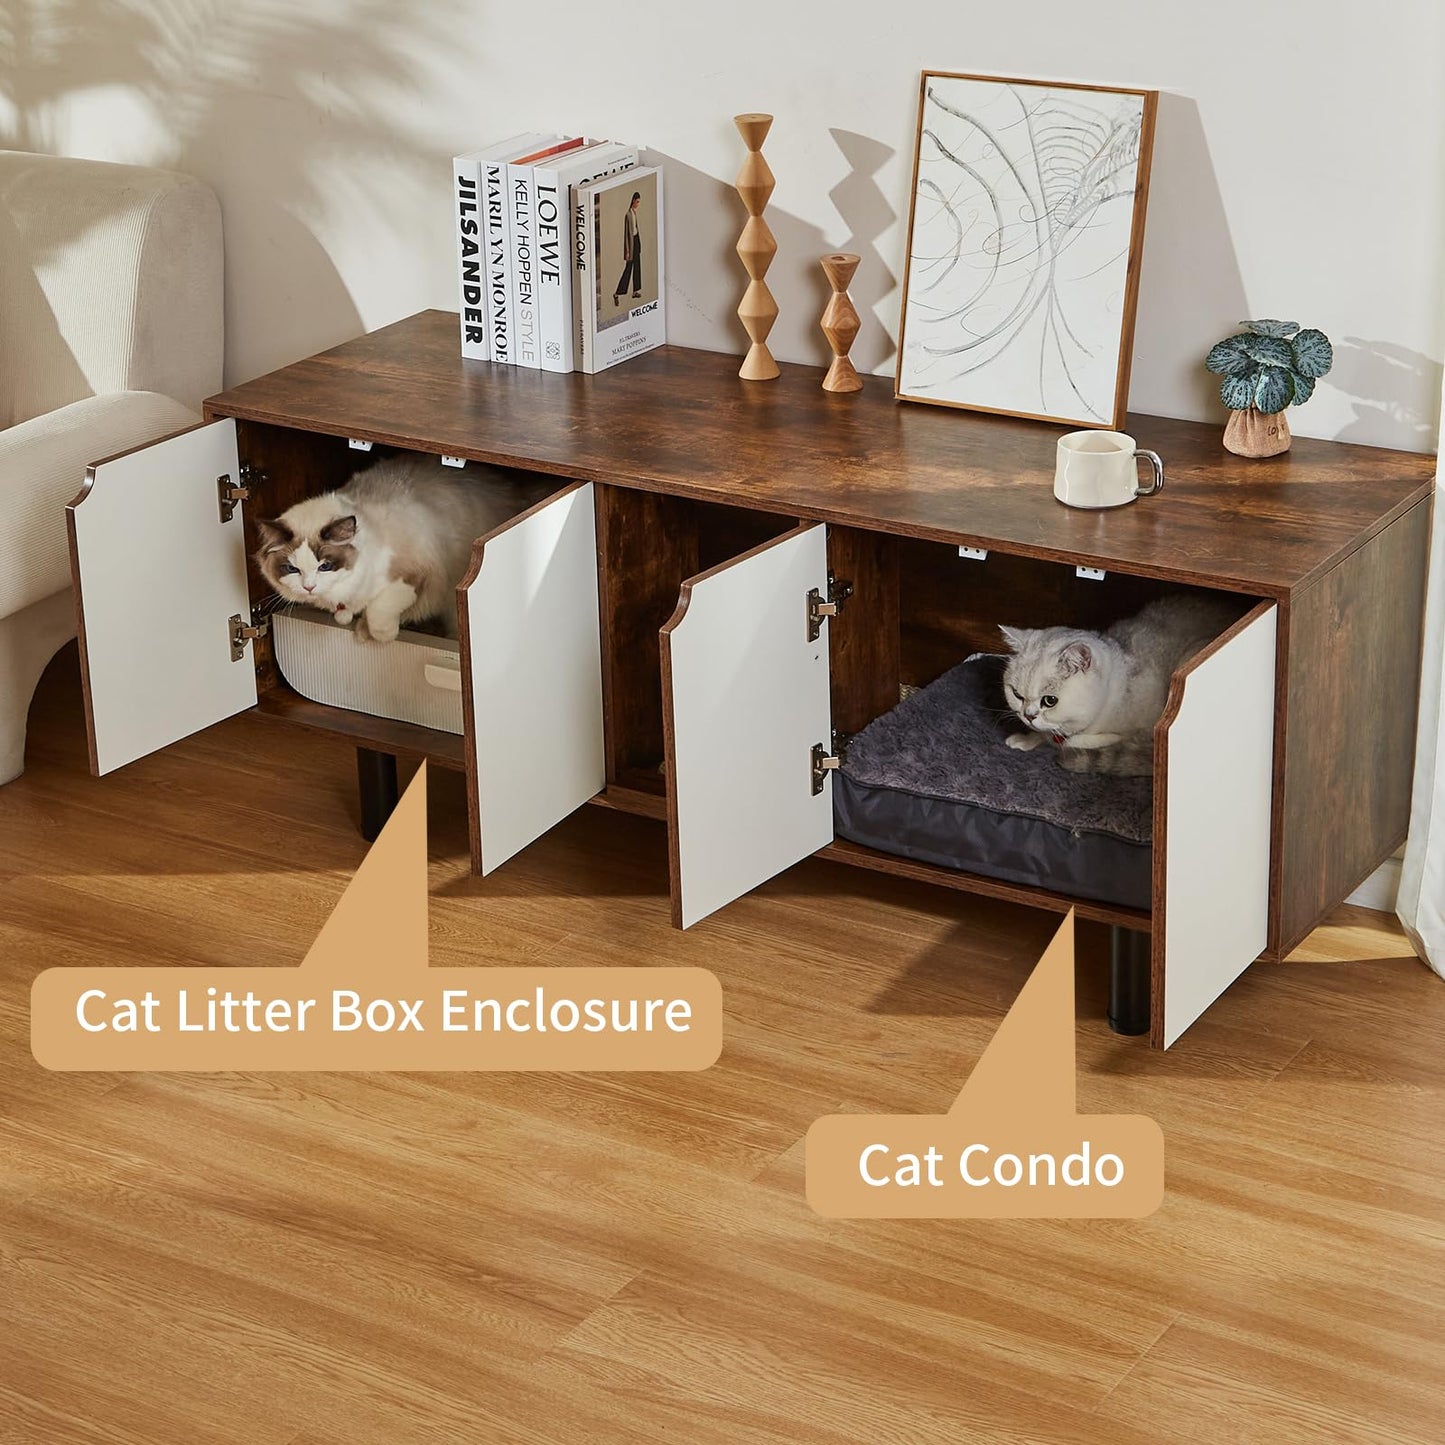 DOICAH Cat Litter Box Enclosure for 2 Cats, Hidden Cat Litter Box Furniture with Double Room,Indoor Cat Condo TV Stand, Double Litter Box Enclosure,Wooden Cat House,Litter Box Furniture